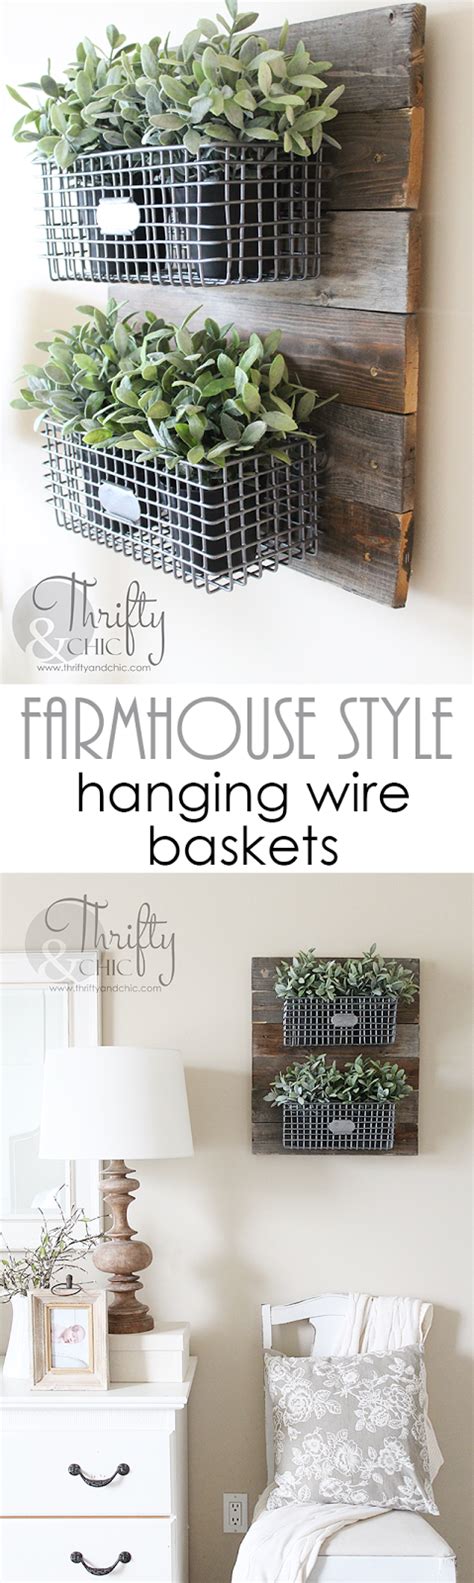 Diy Farmhouse Style Hanging Wire Baskets On Reclaimed Wood Diy Decor Room